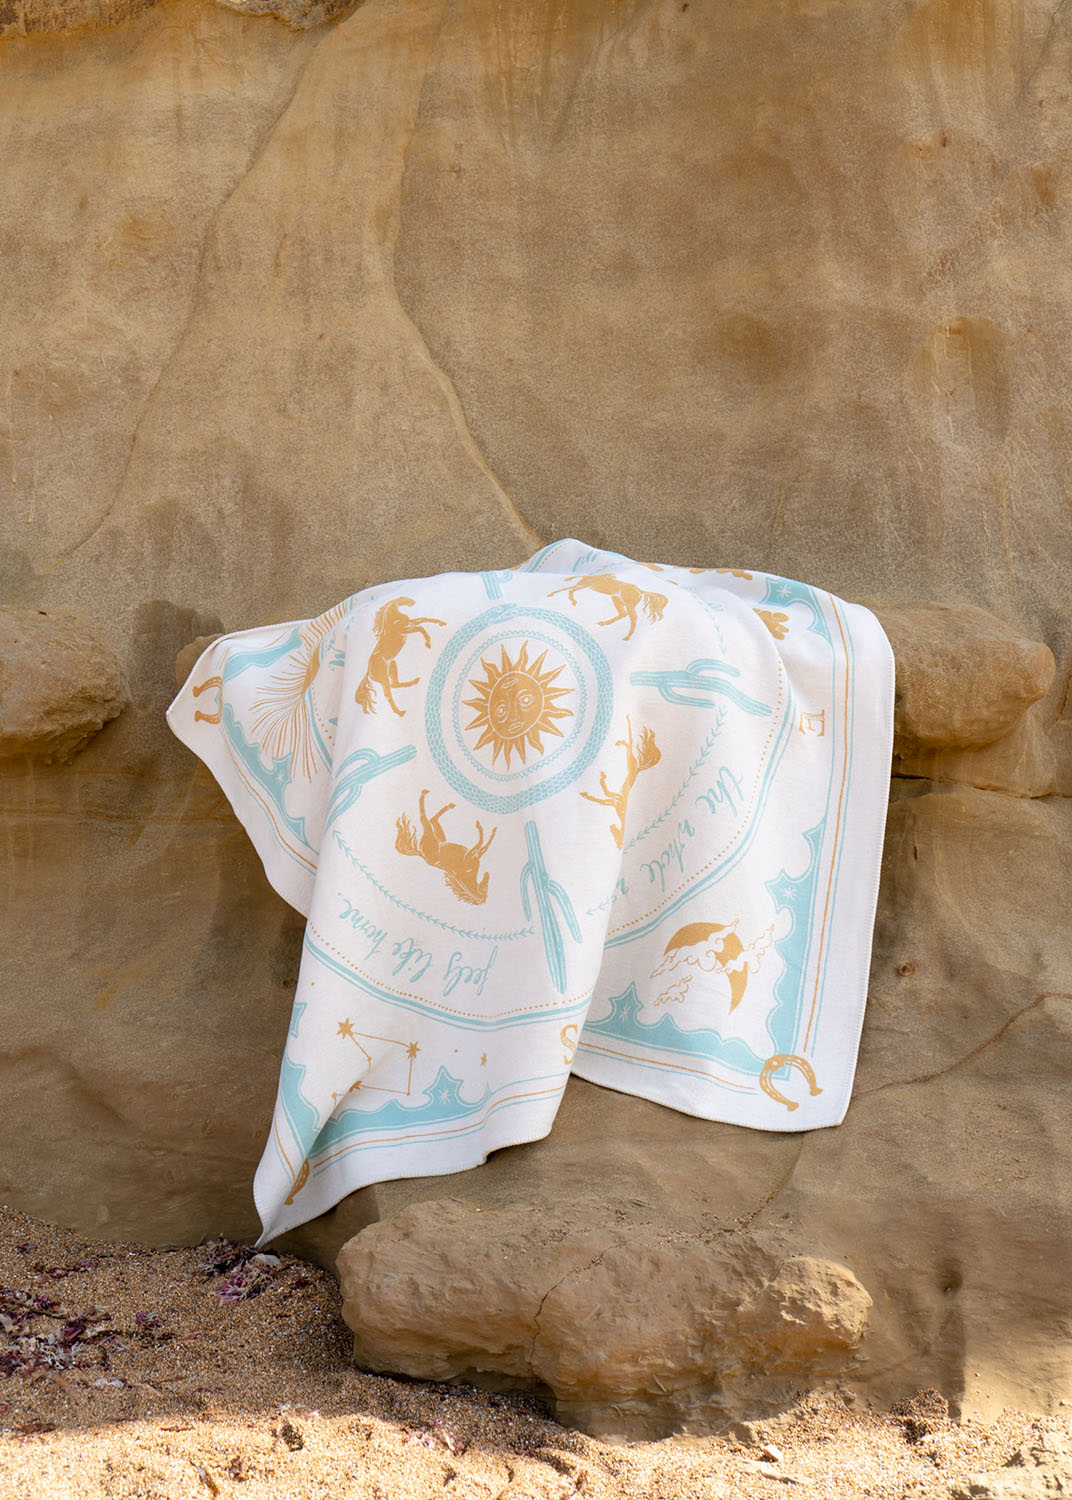 Woven Recycled Cotton Blanket - Wanderers, Beach